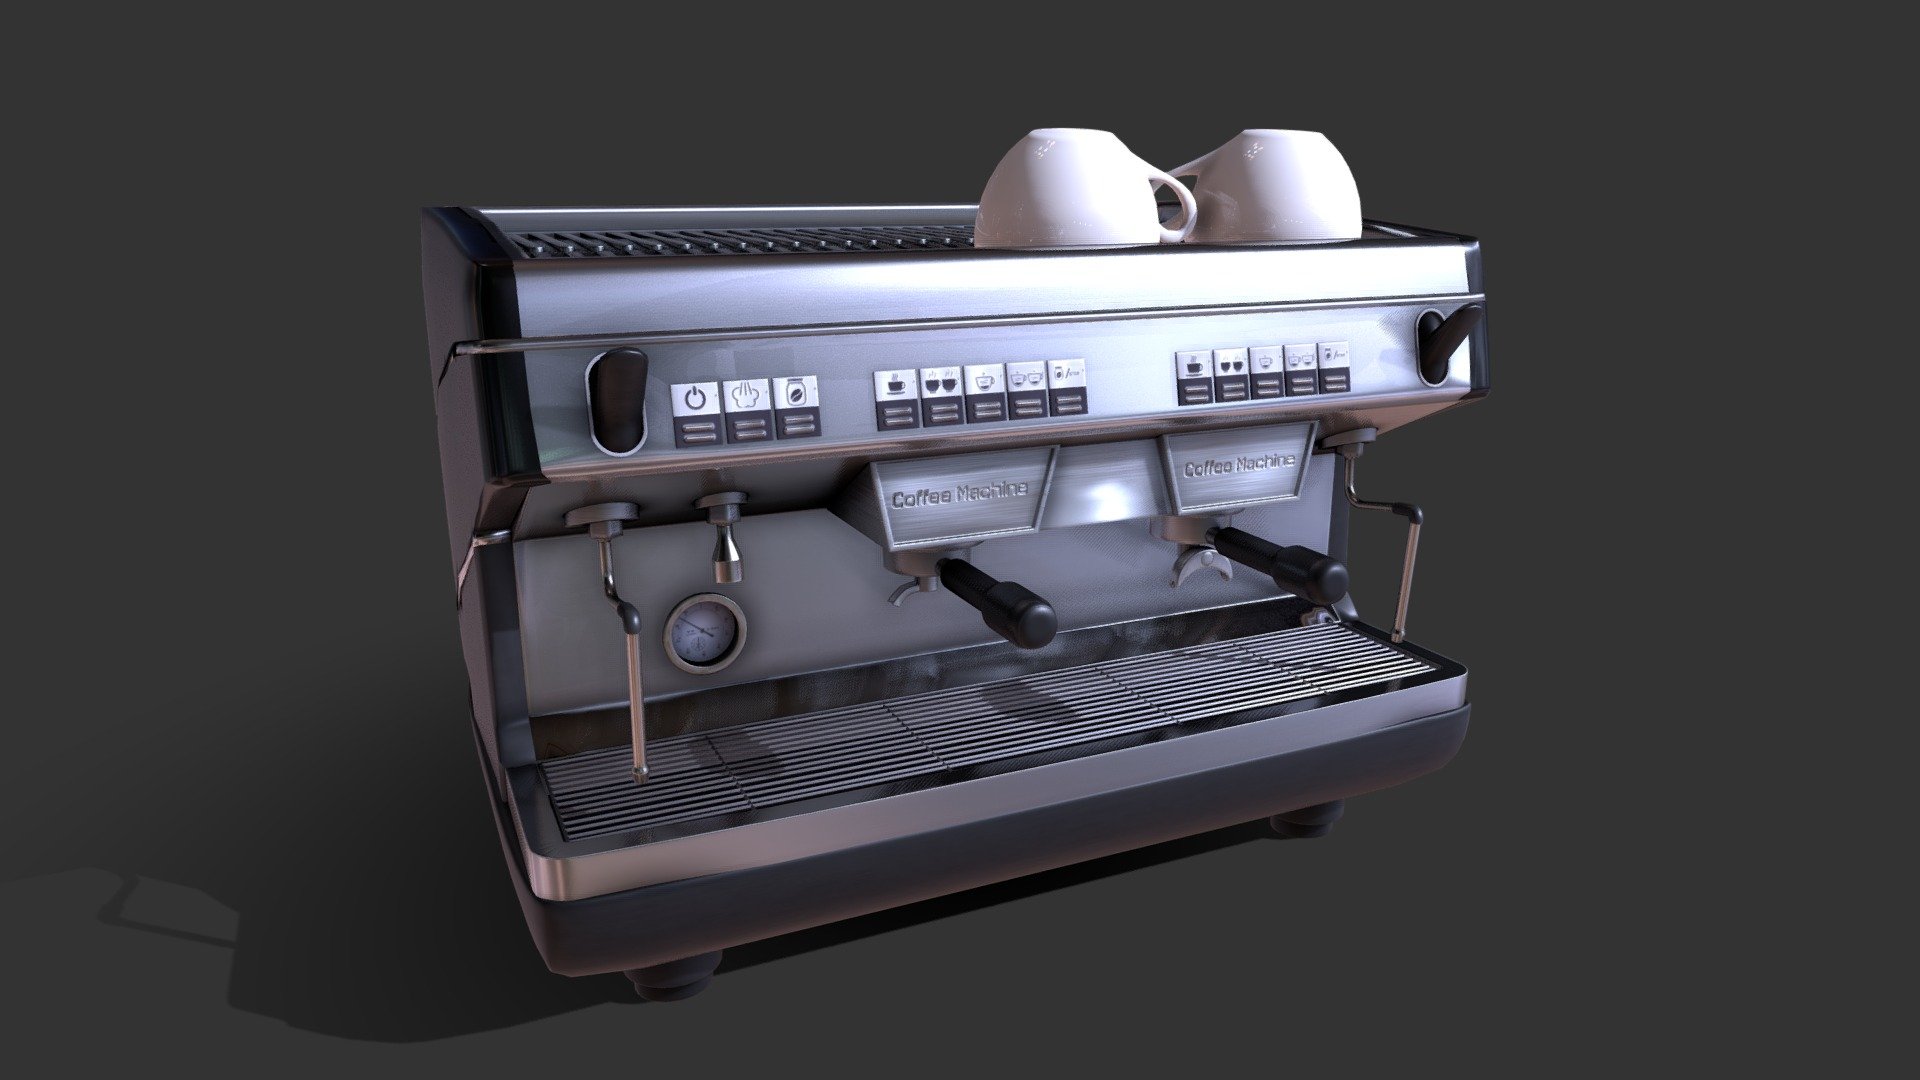 This coffee machine was created for my job project.
Modelled in Blender.
Textured in Substance Painter 3d model